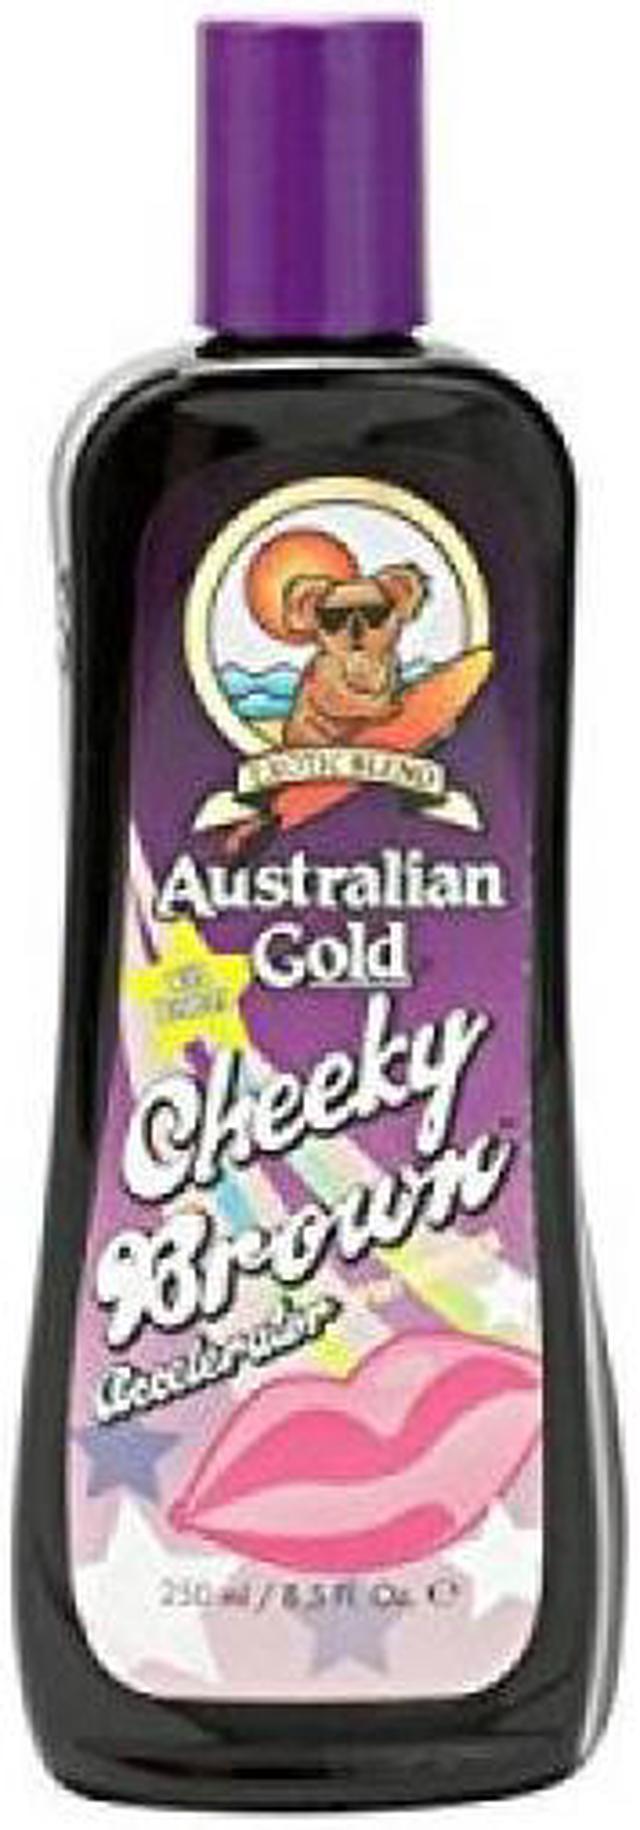 Australian Gold, CHEEKY BROWN Accelerator Natural Bronzers, Tanning Lotion 8.5 oz Dolls & Accessories - Newegg.com